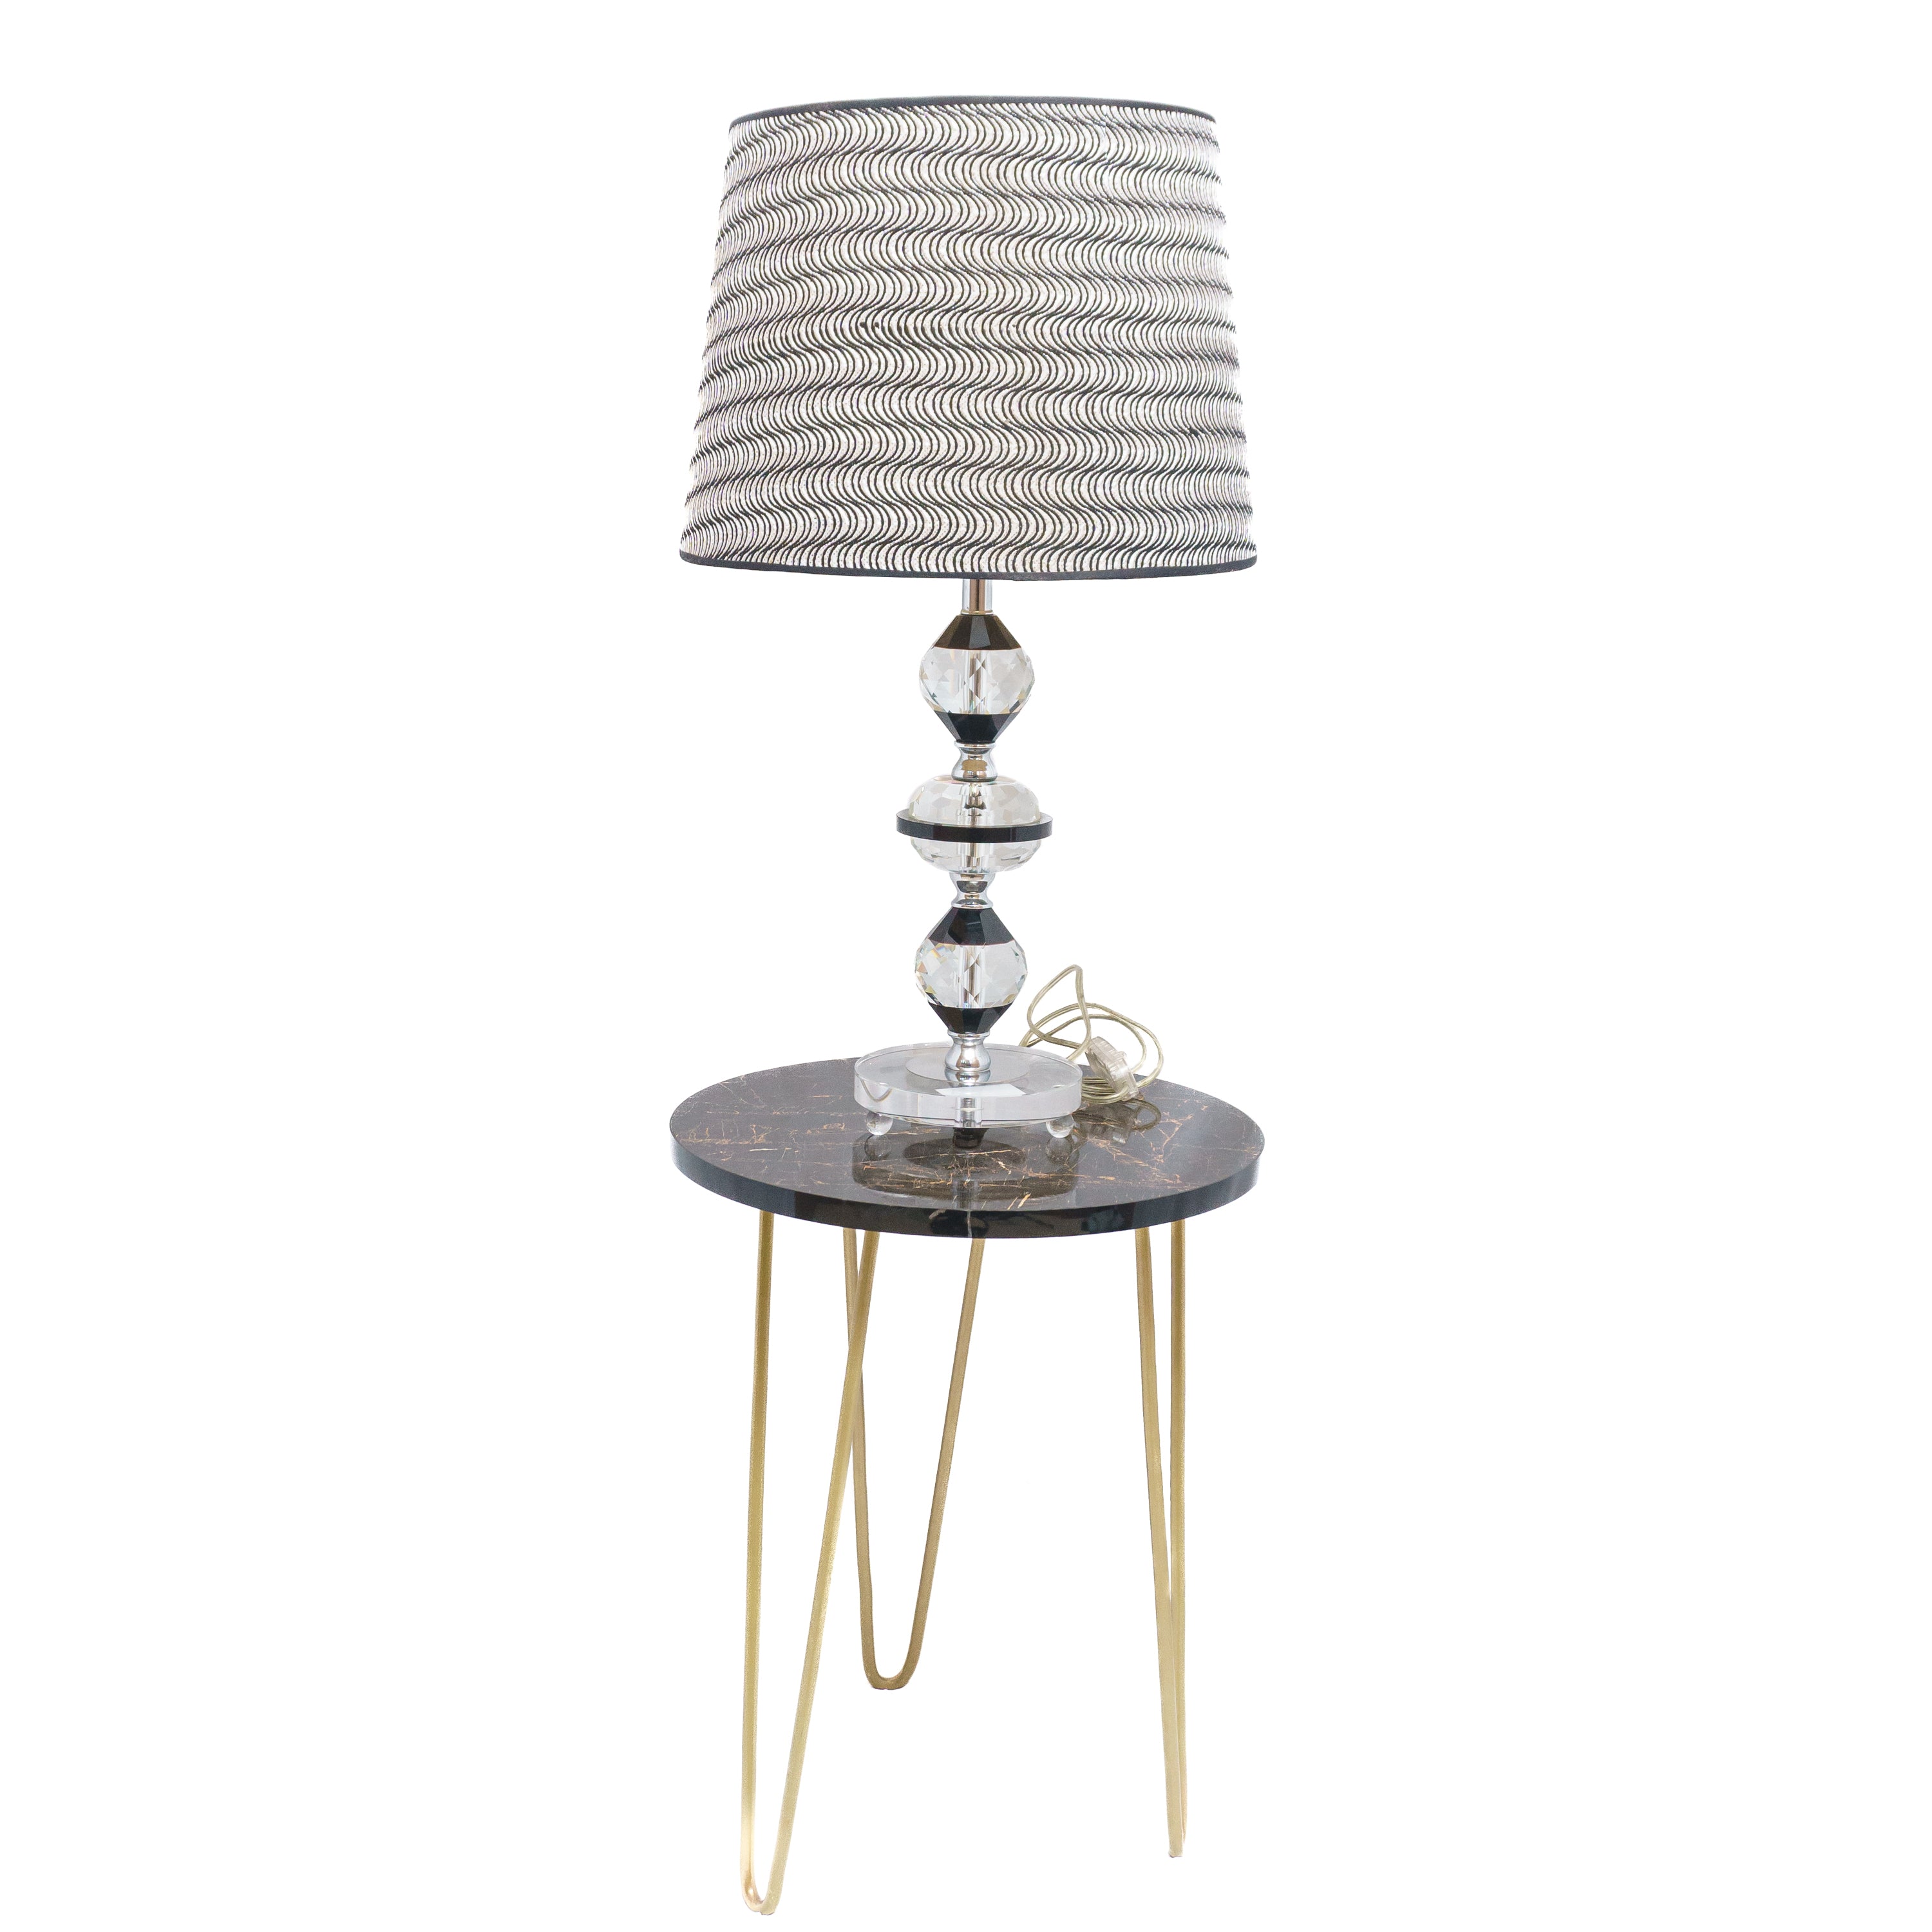 Crystal Wave Table Lamp: Diamond Ball Stand with Wavy Style Shade